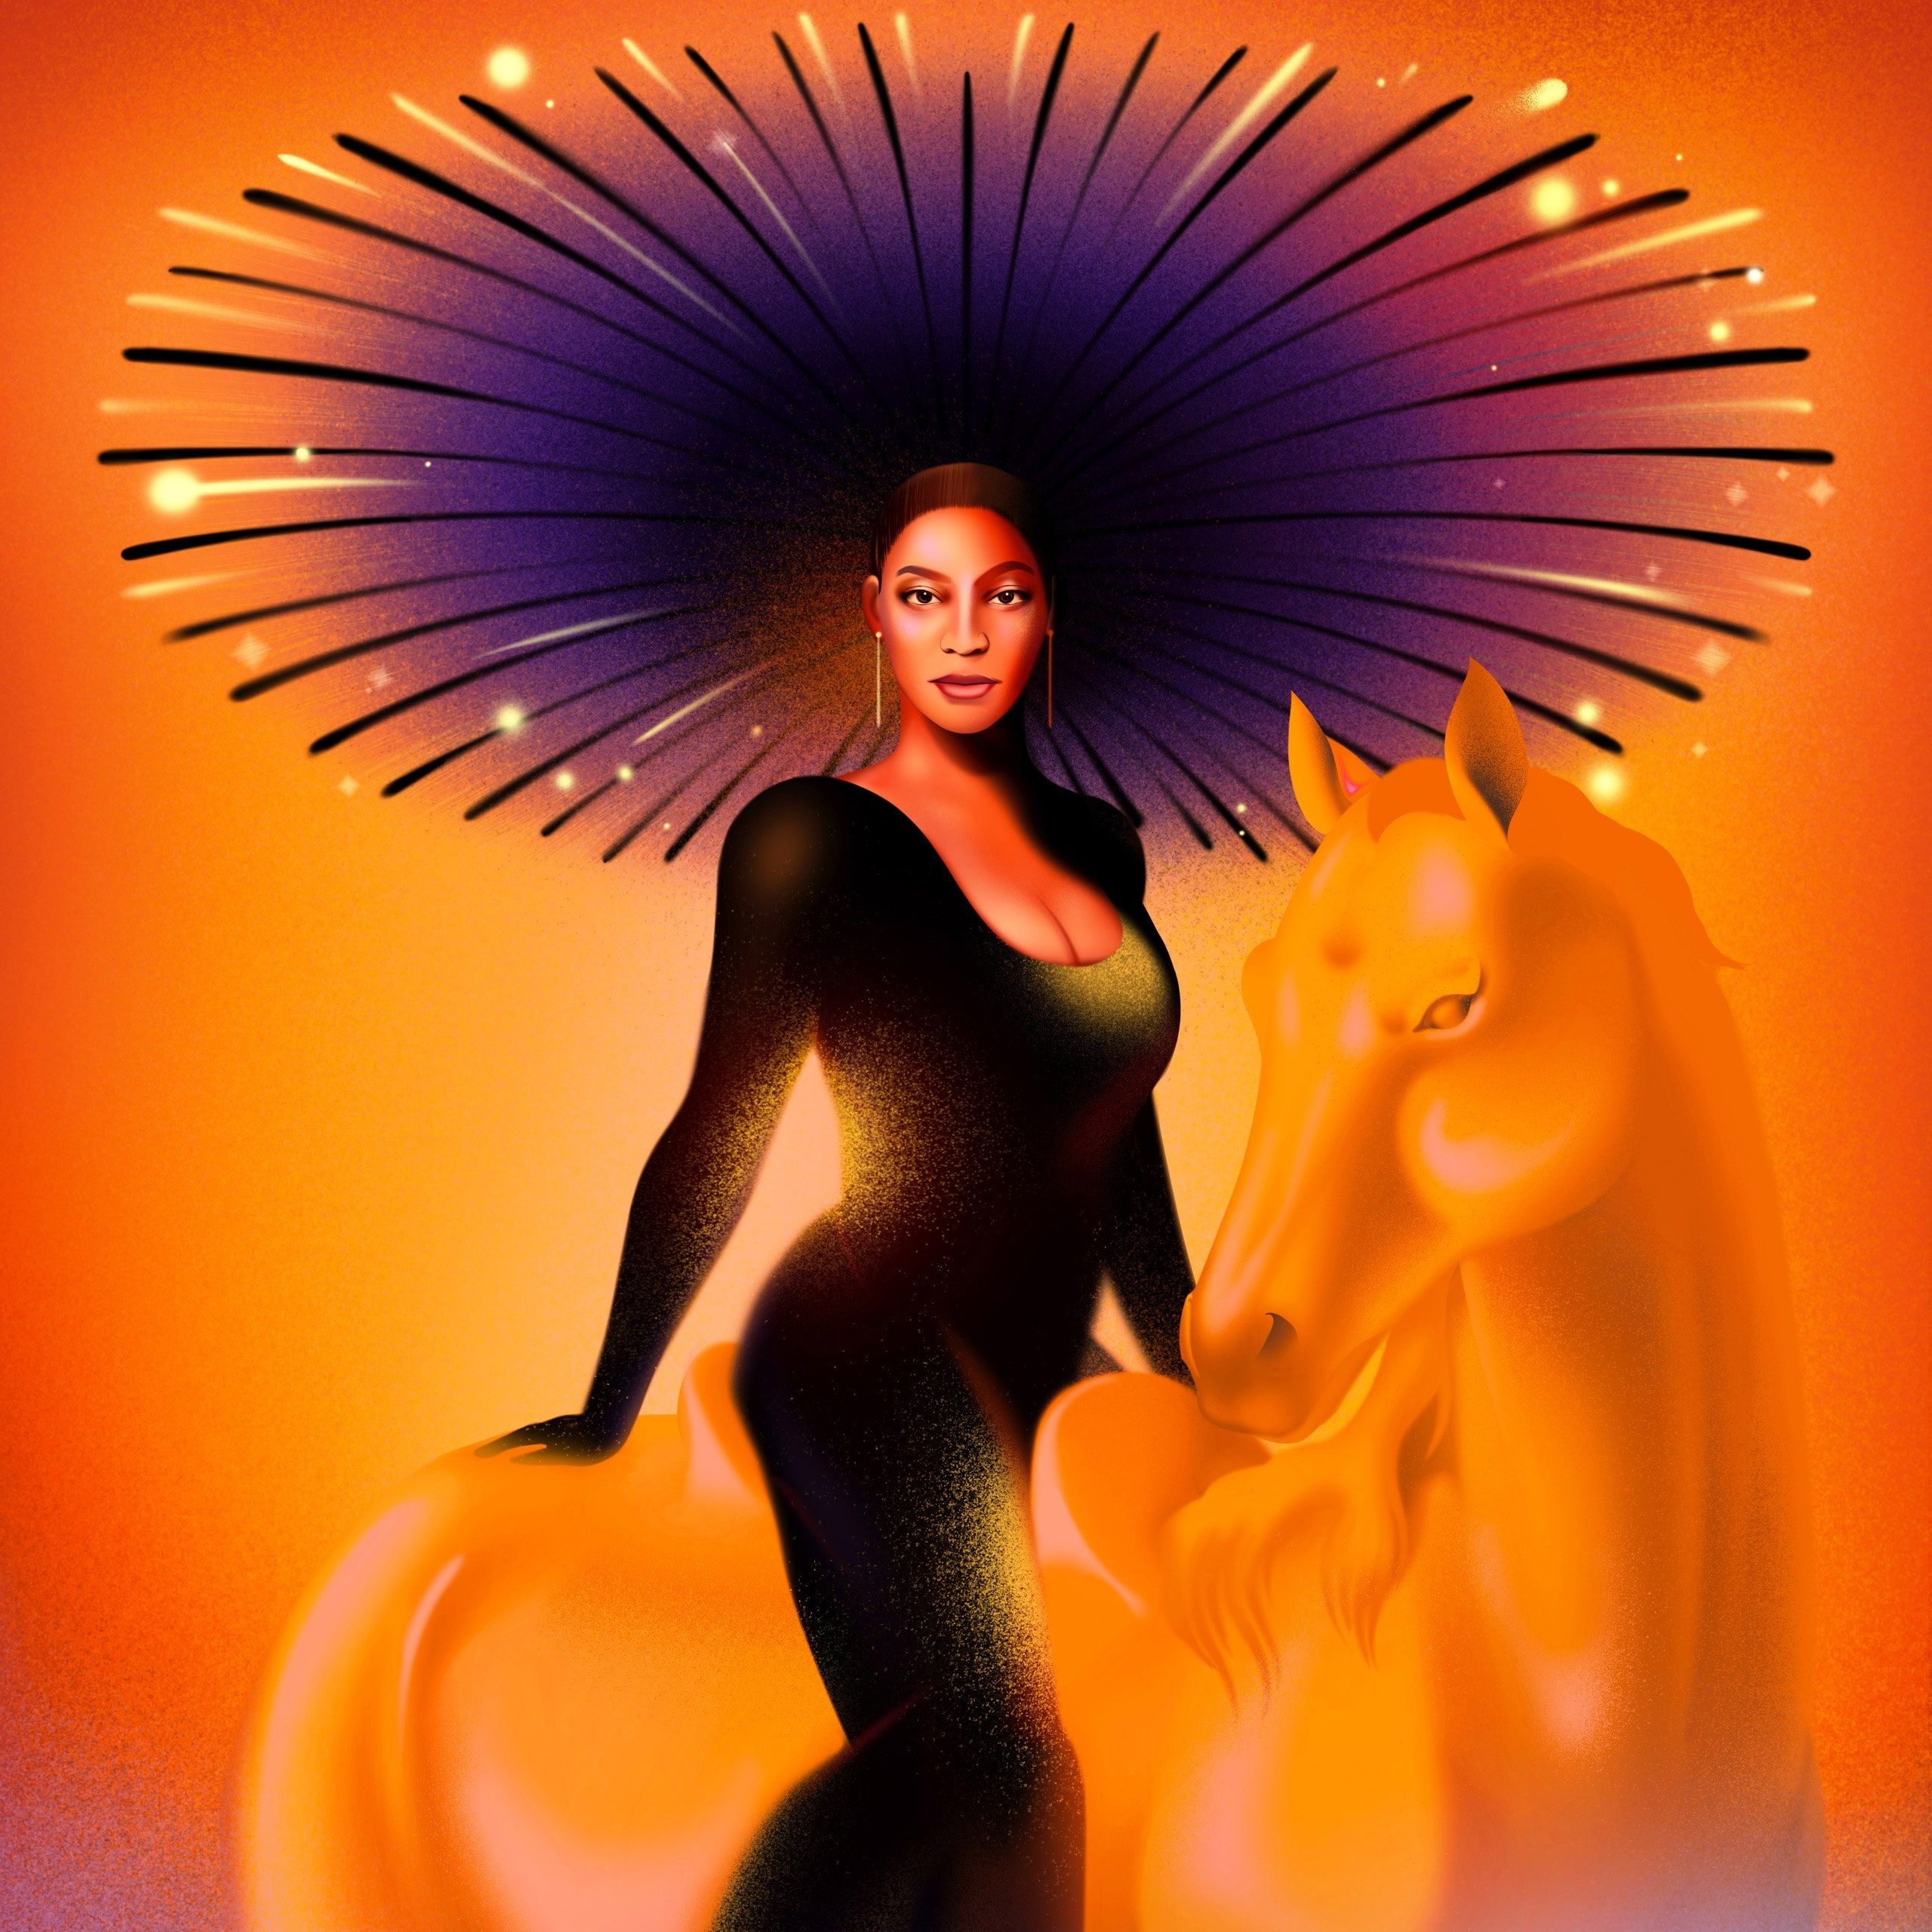 A woman in a black dress and a large sunhat sits on a golden horse. - Beyonce